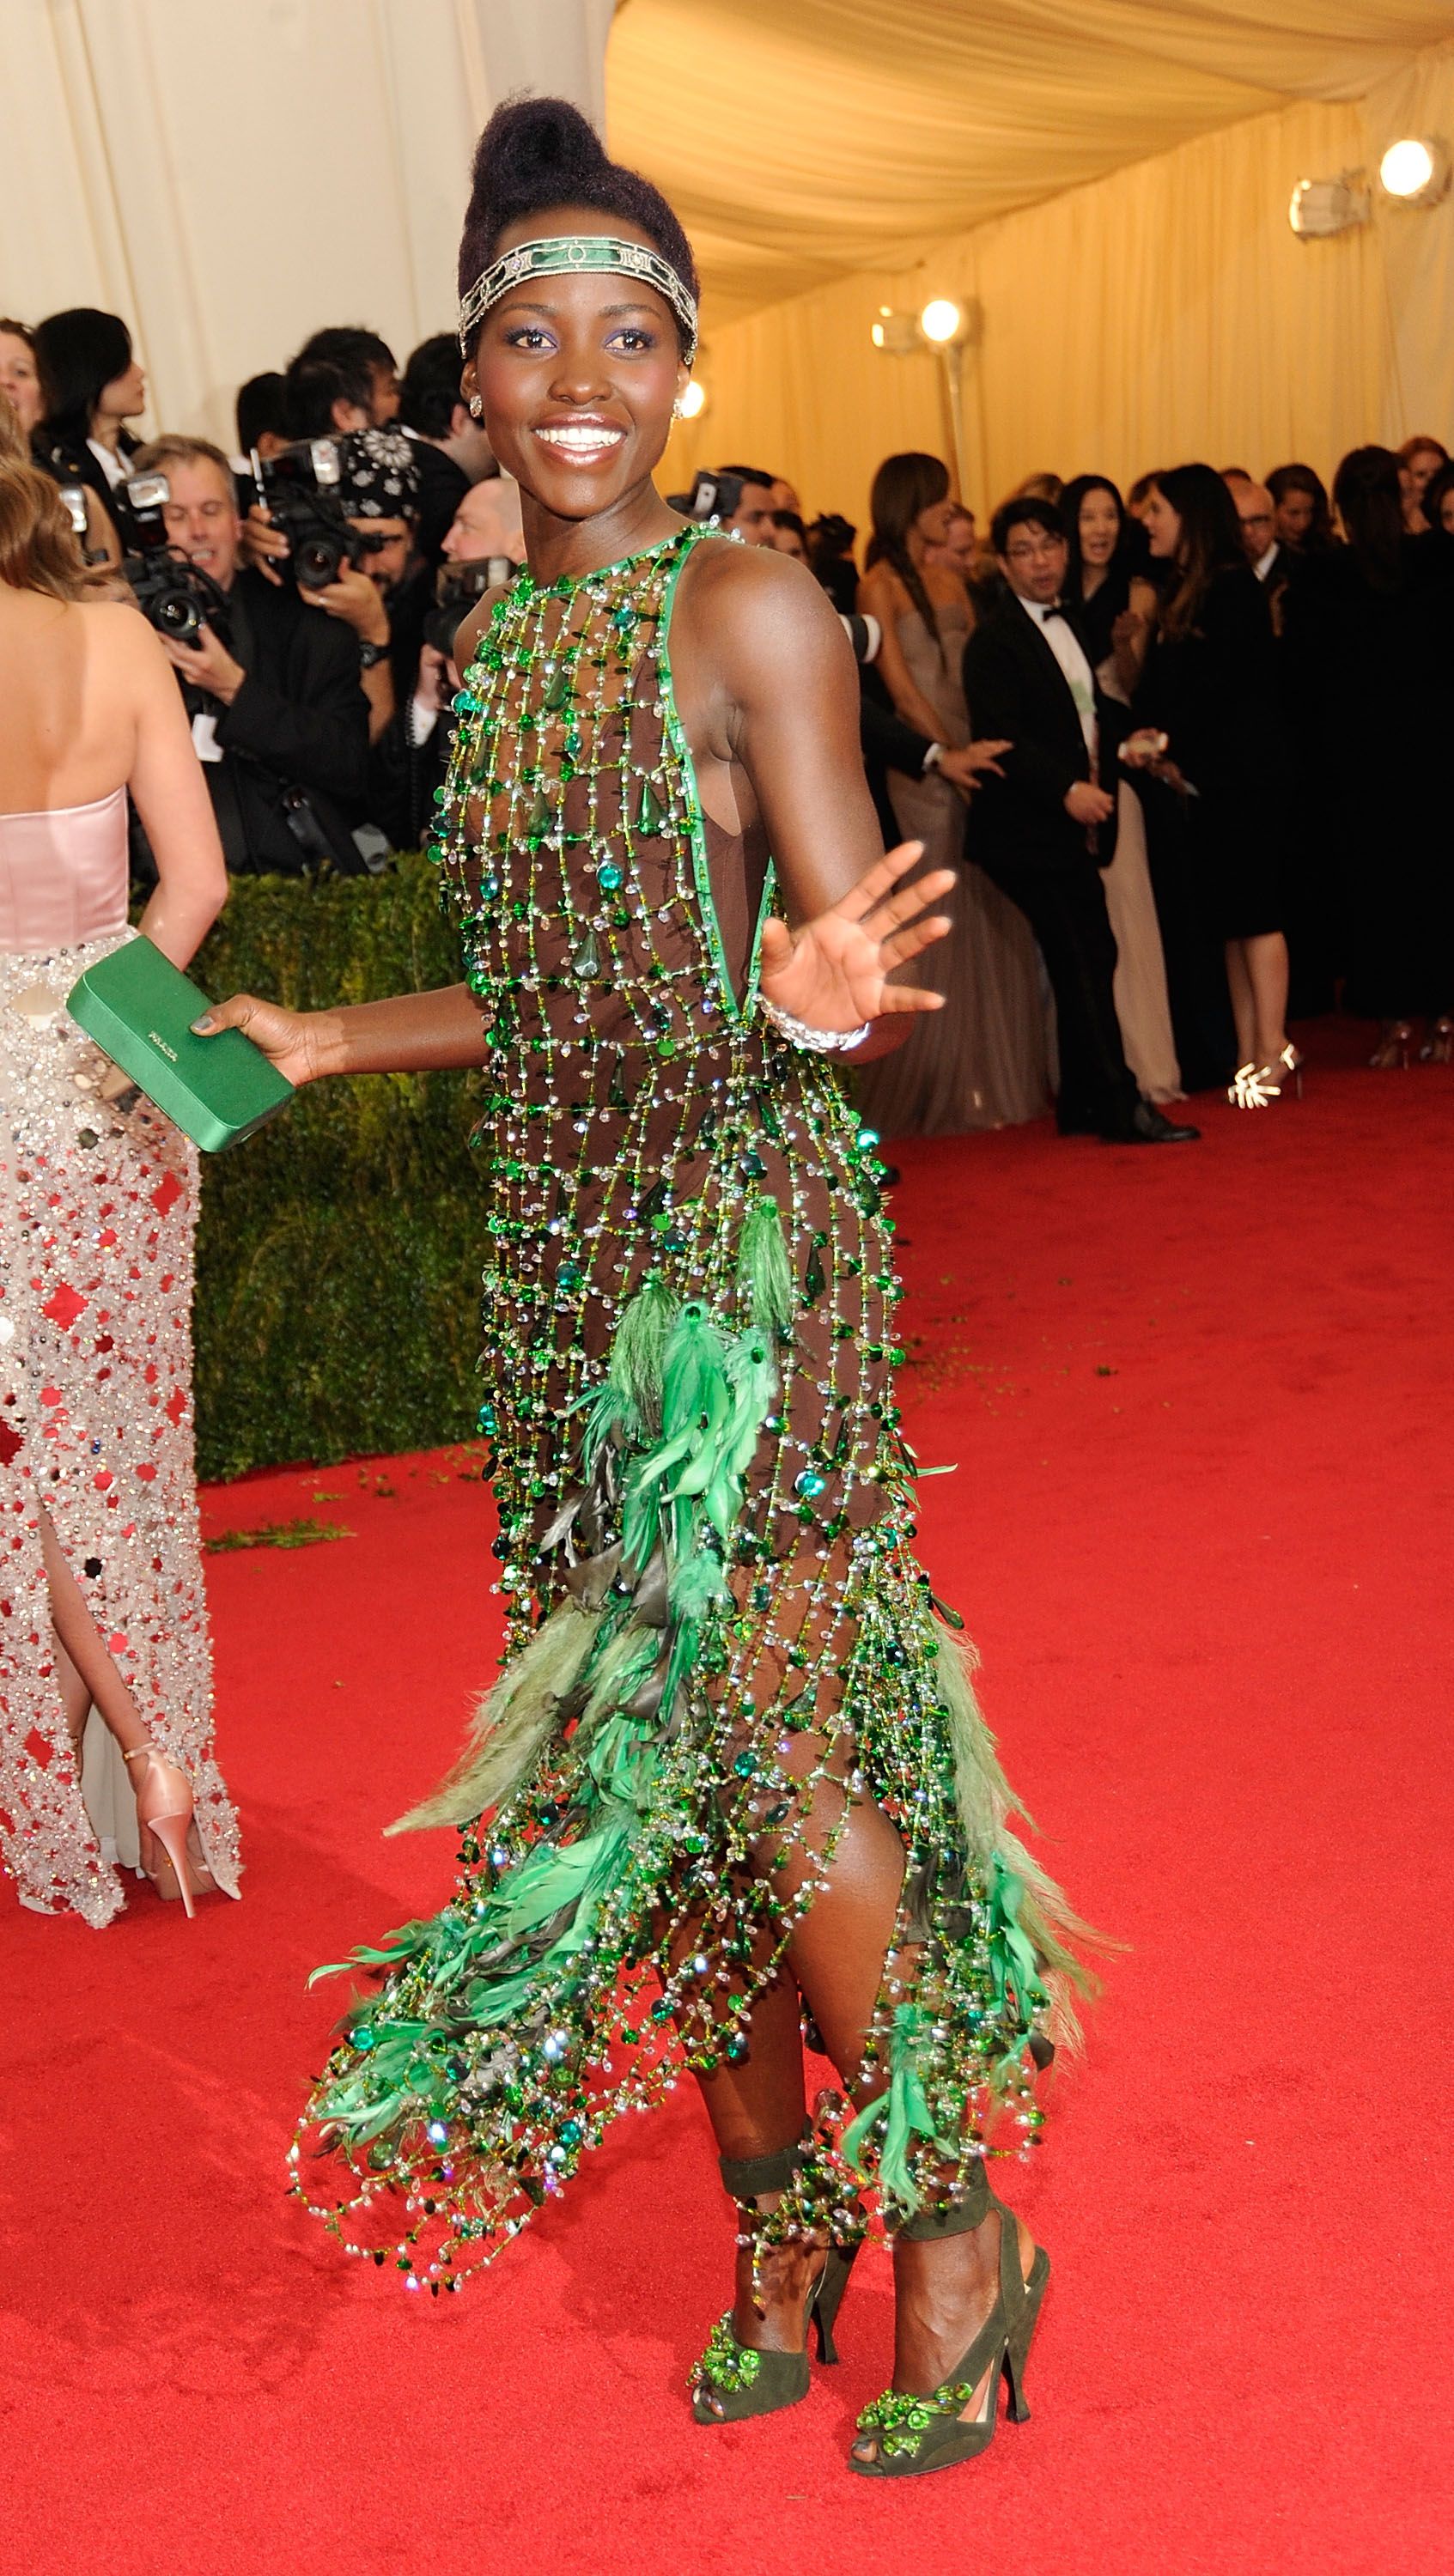 Met Ball: The good, the bad & the ugly